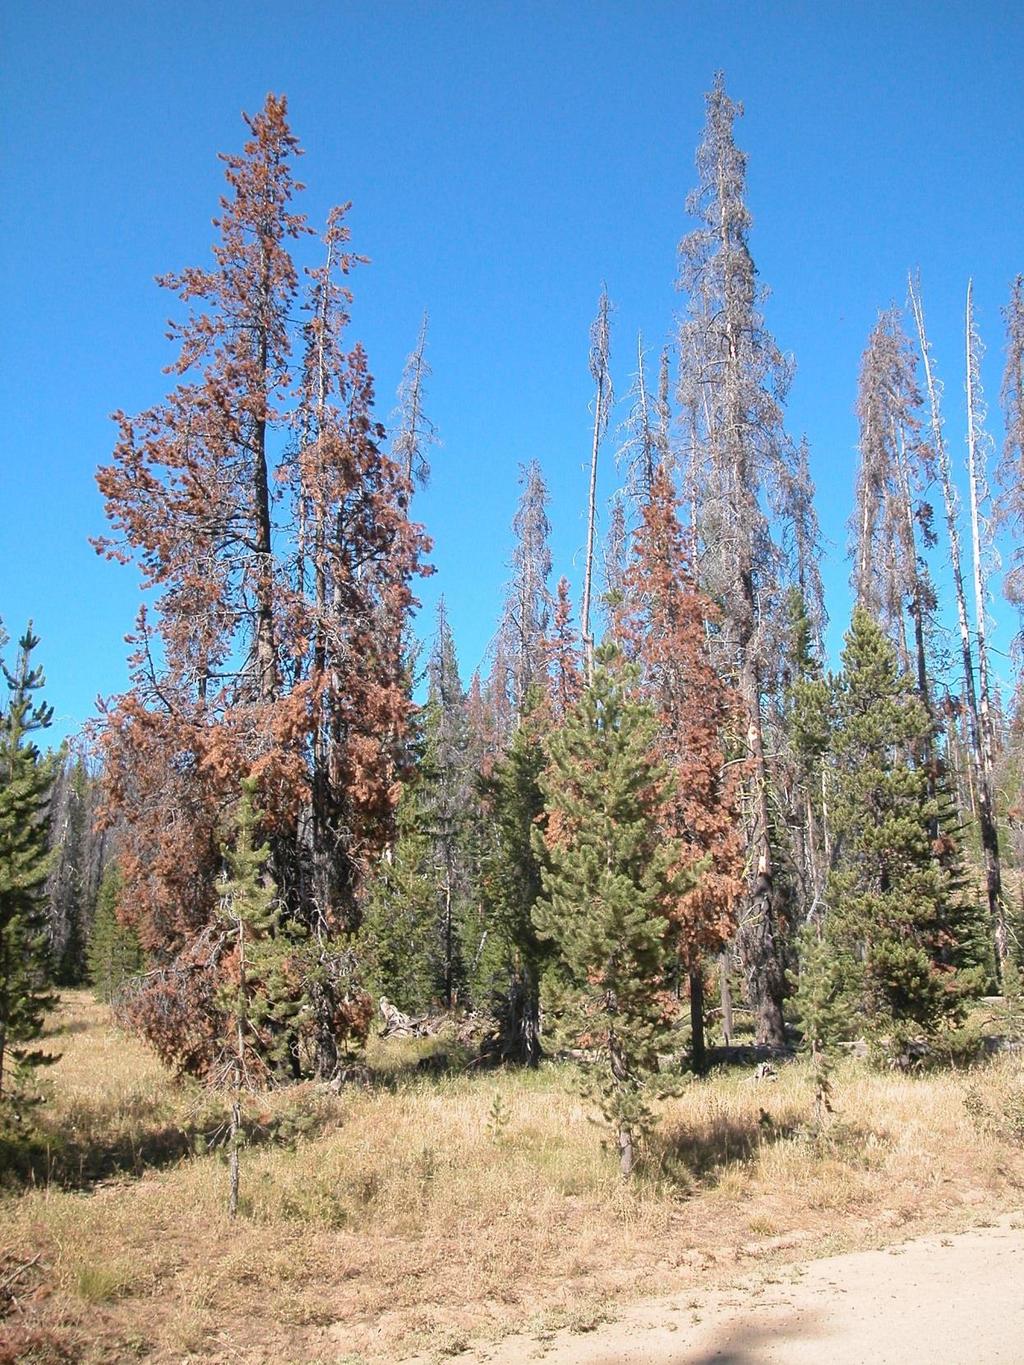 Increased risk of insect outbreaks Near-term increased risk of mountain pine beetle outbreaks in drier forests will